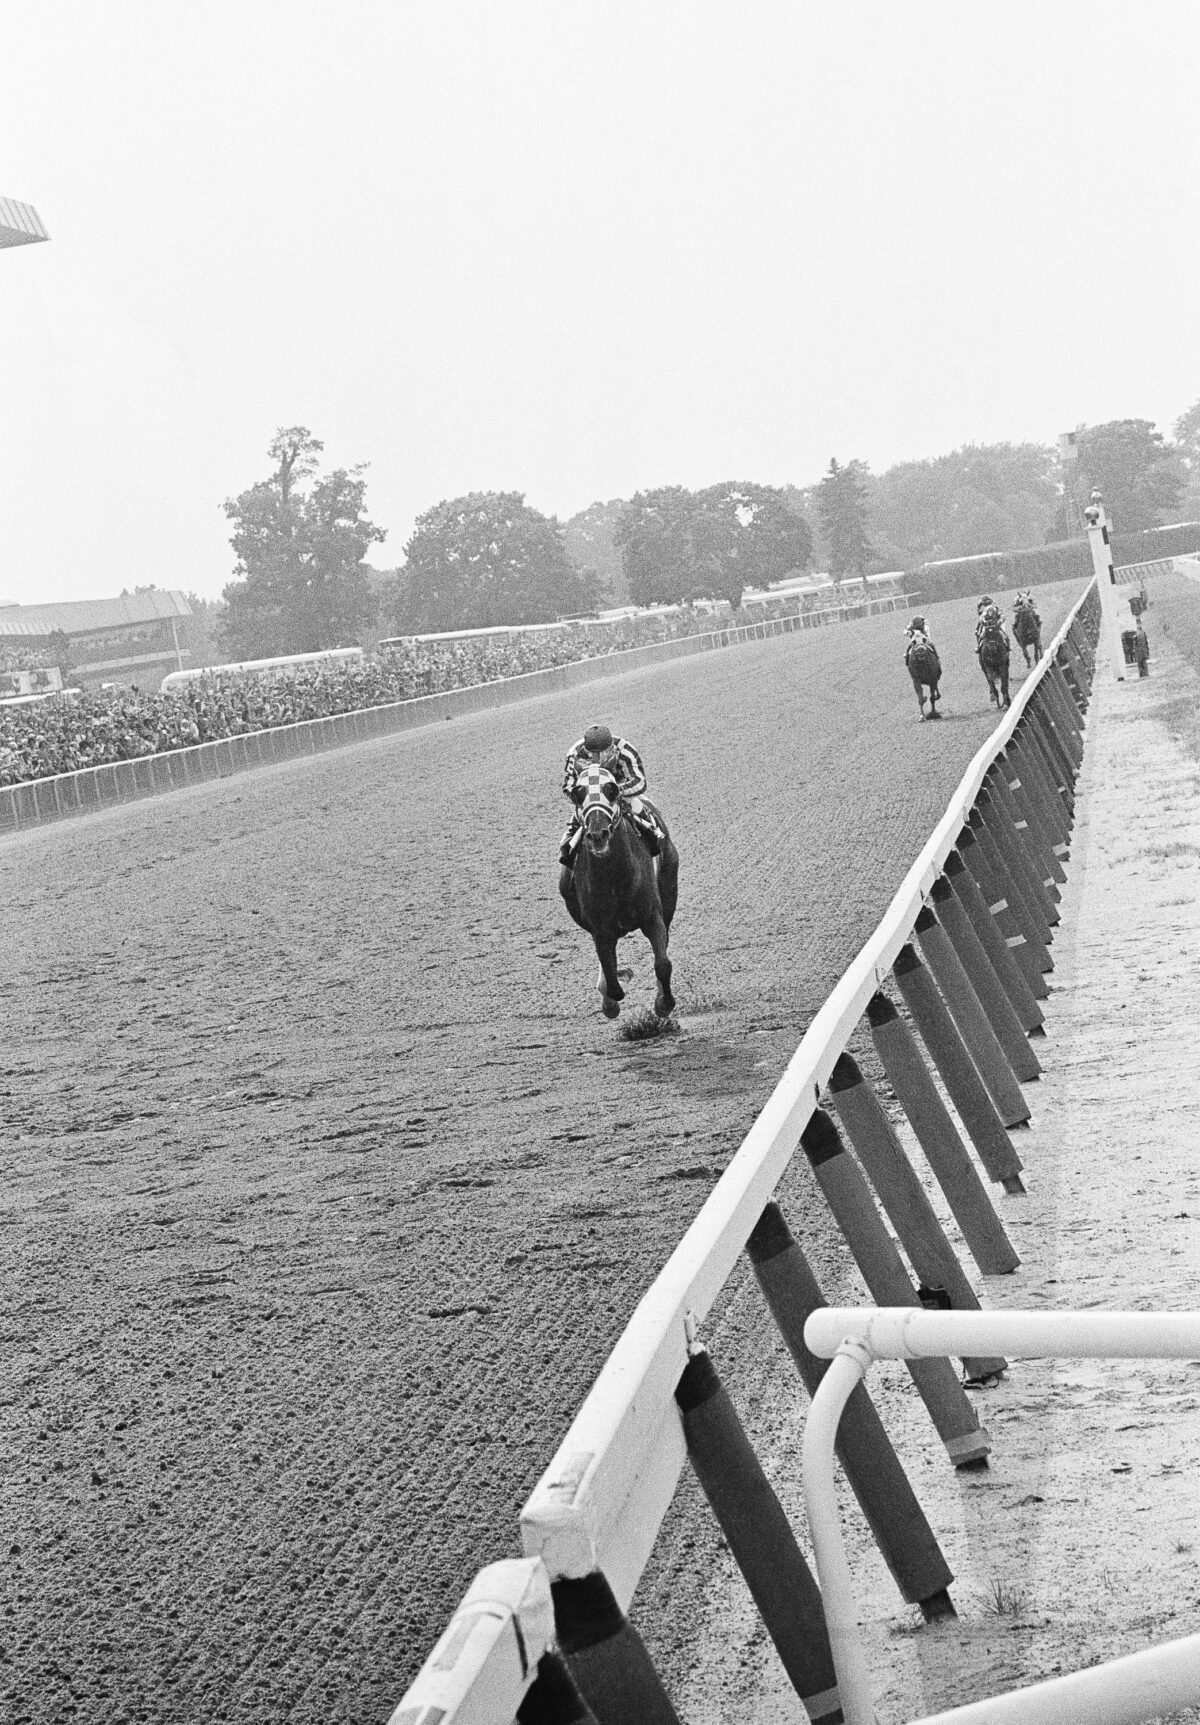 Photos: 49 years ago at the Belmont Stakes, Secretariat ran horse racing’s greatest race